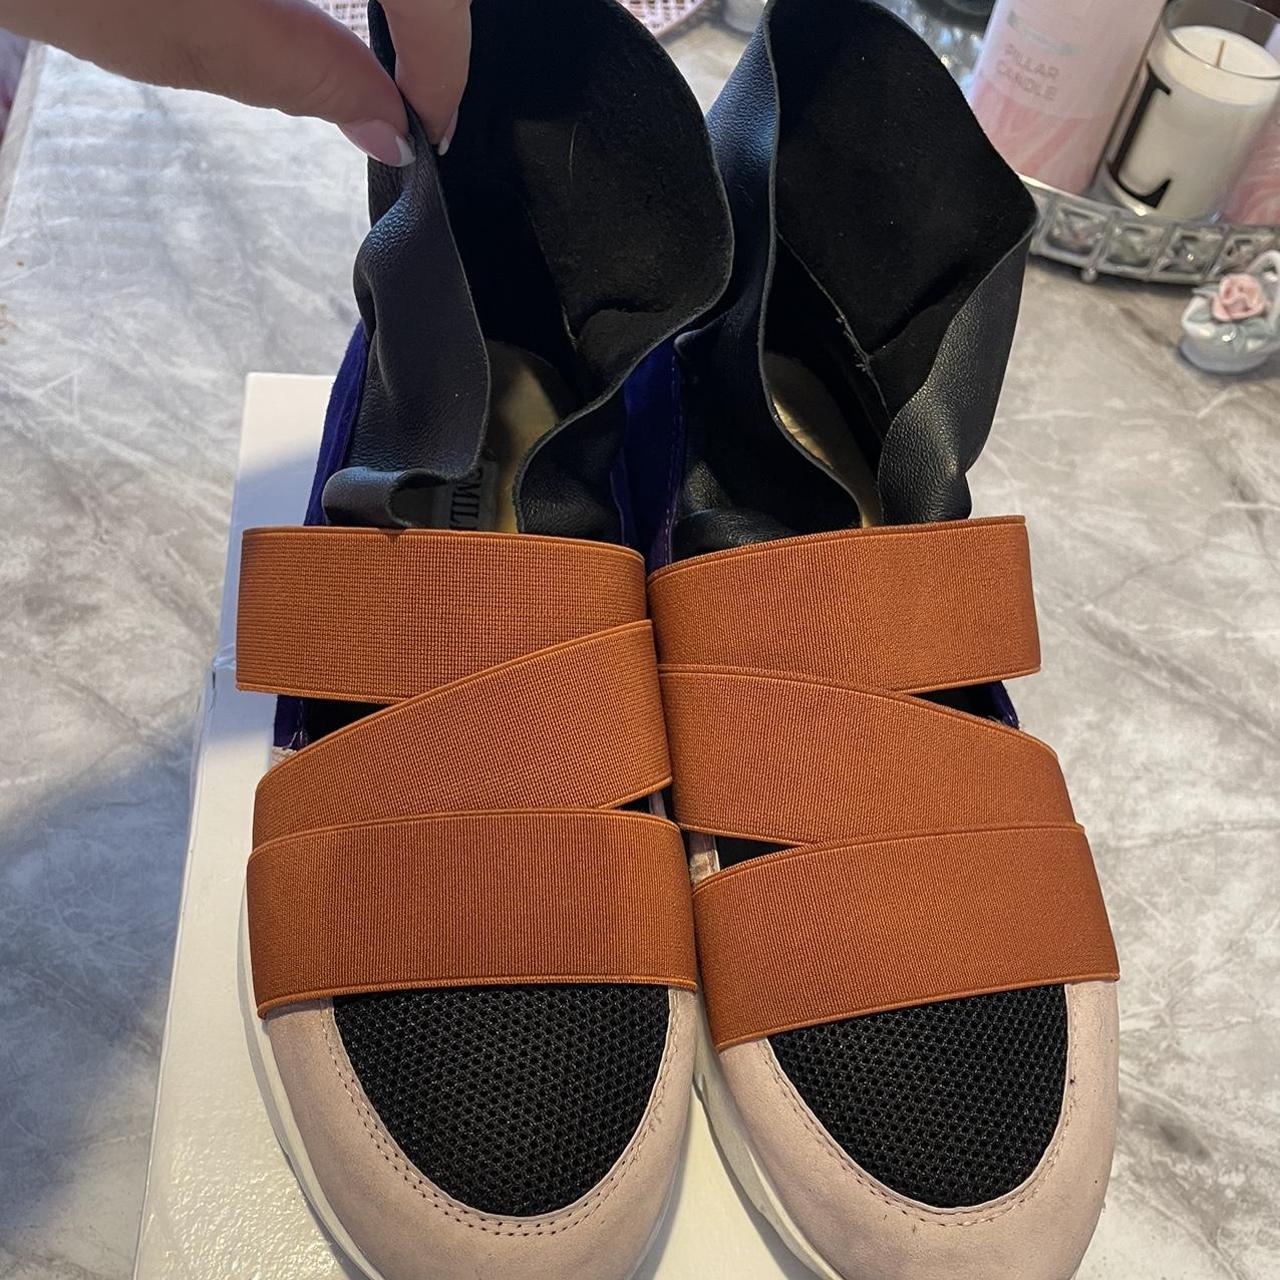 Authentic Pucci shoes fully lined with leather suede - Depop